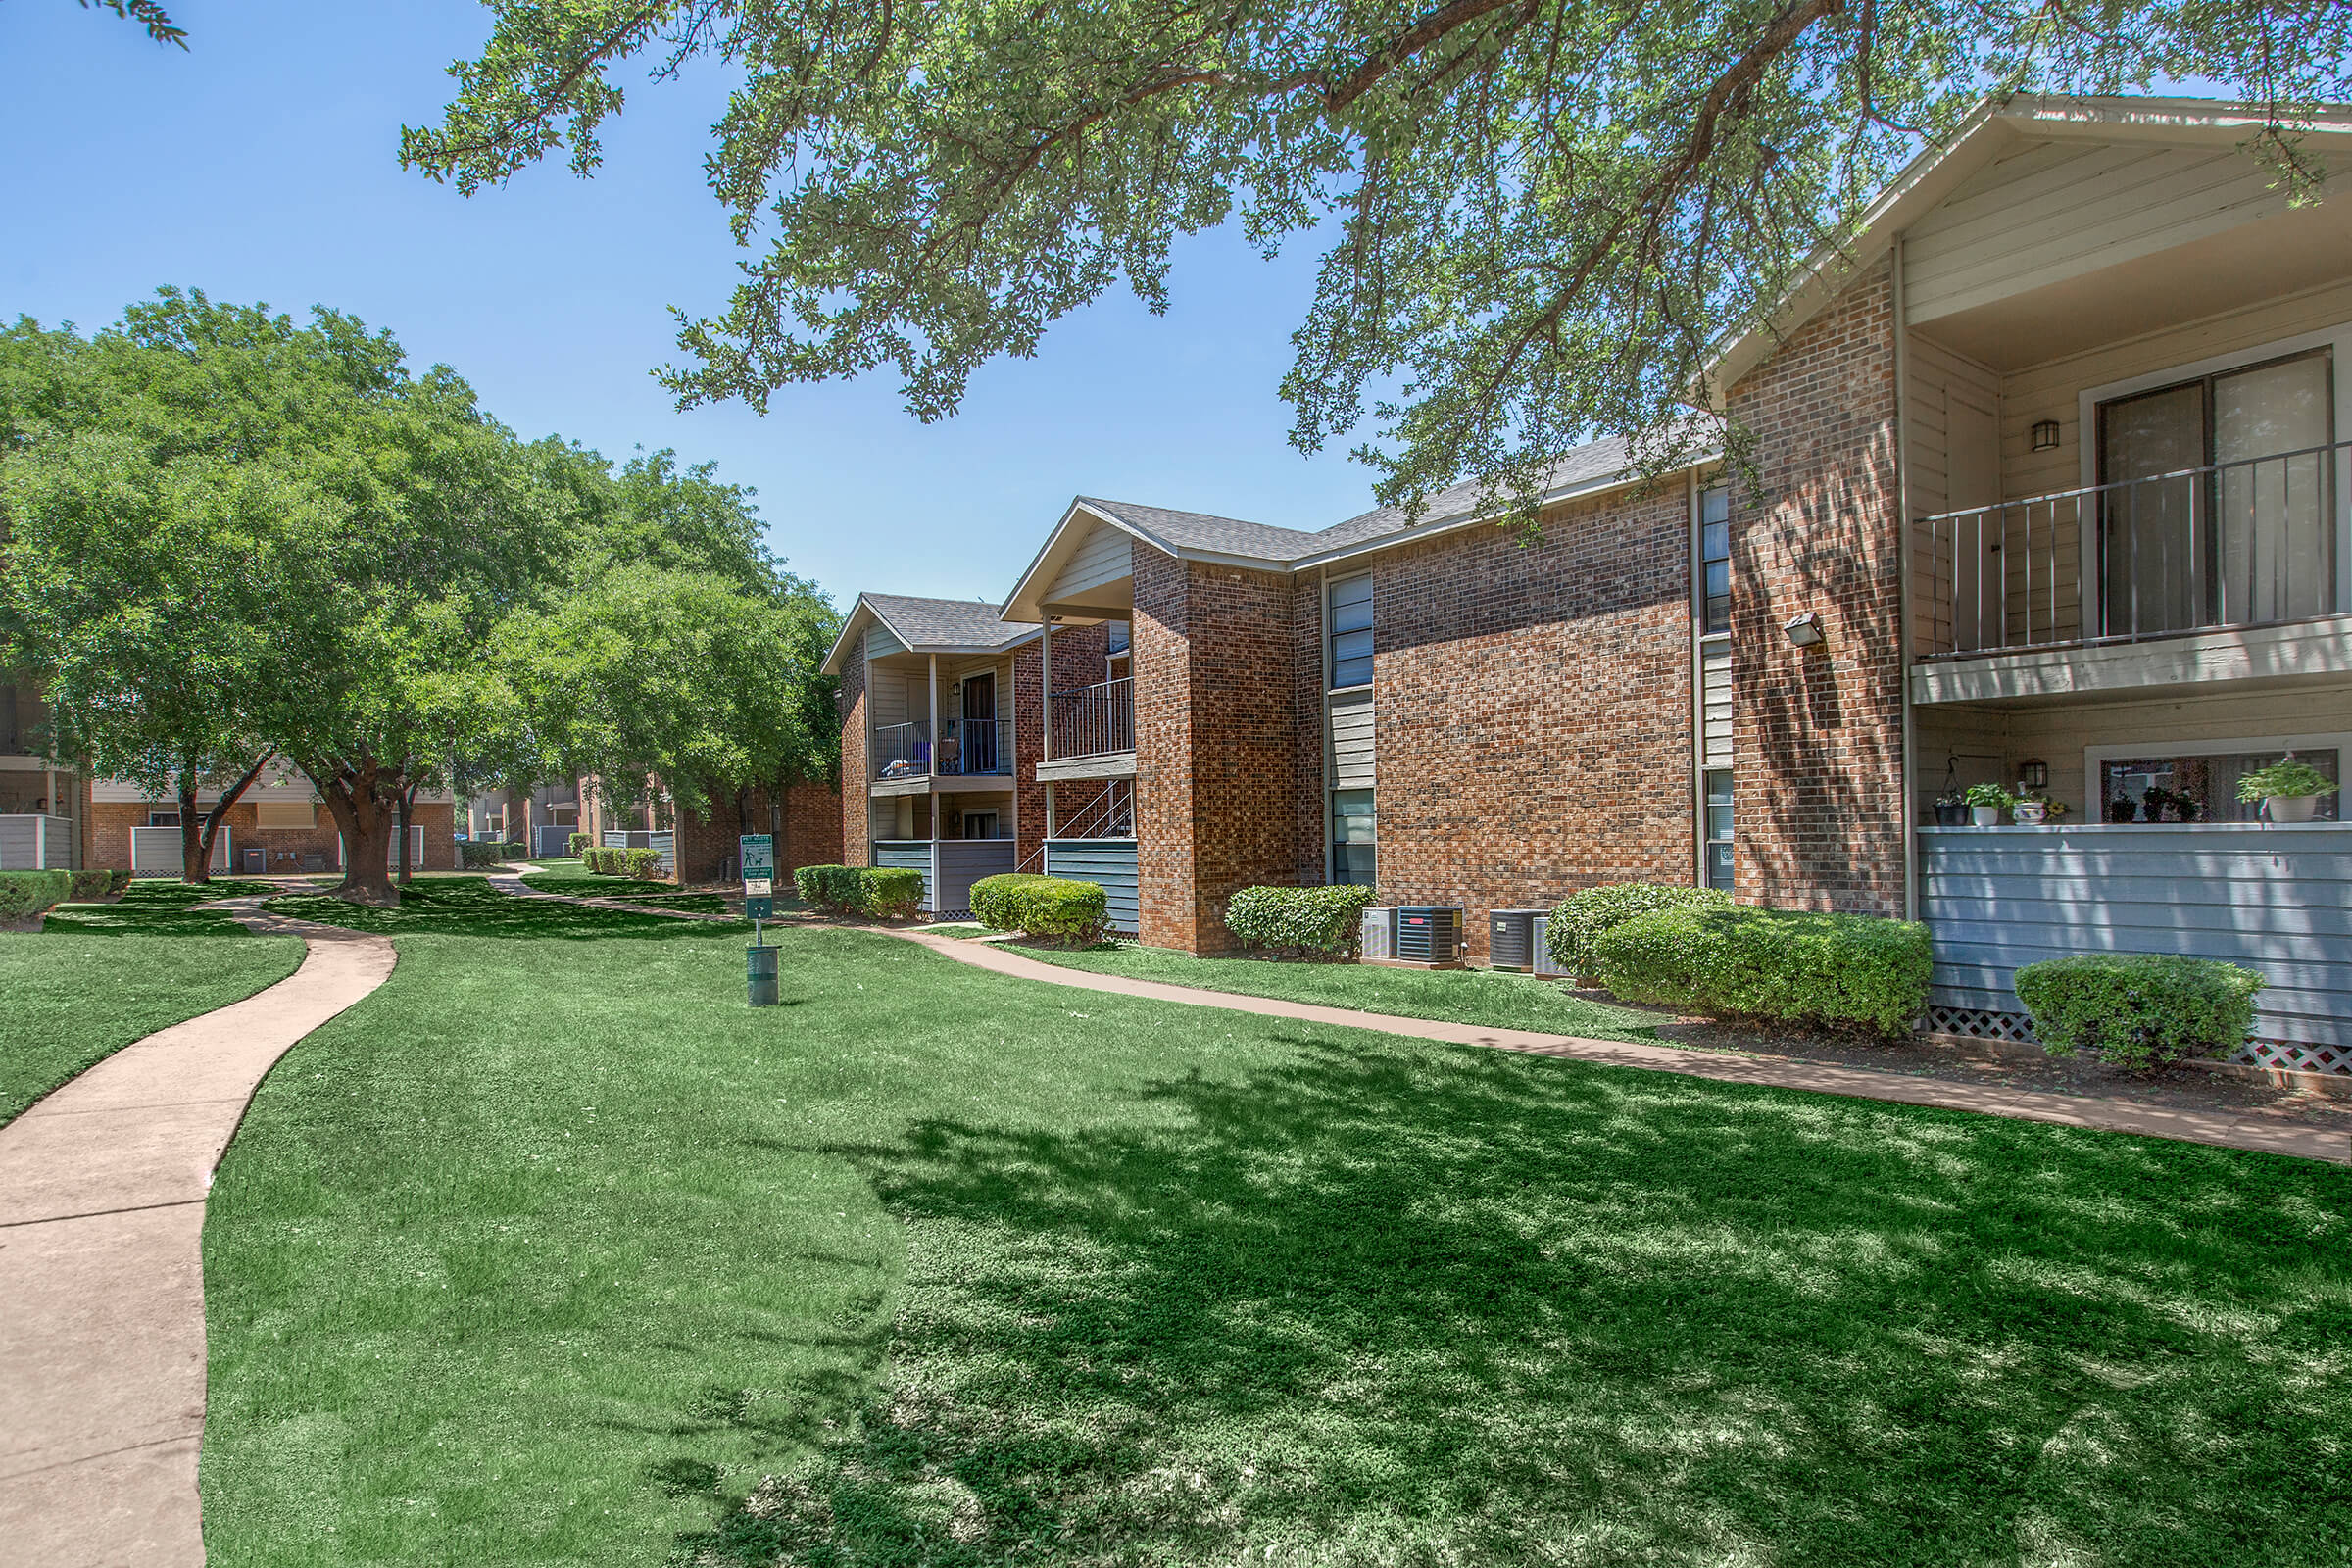 WELCOME TO COPPER CREEK APARTMENTS IN ABILENE, TEXAS